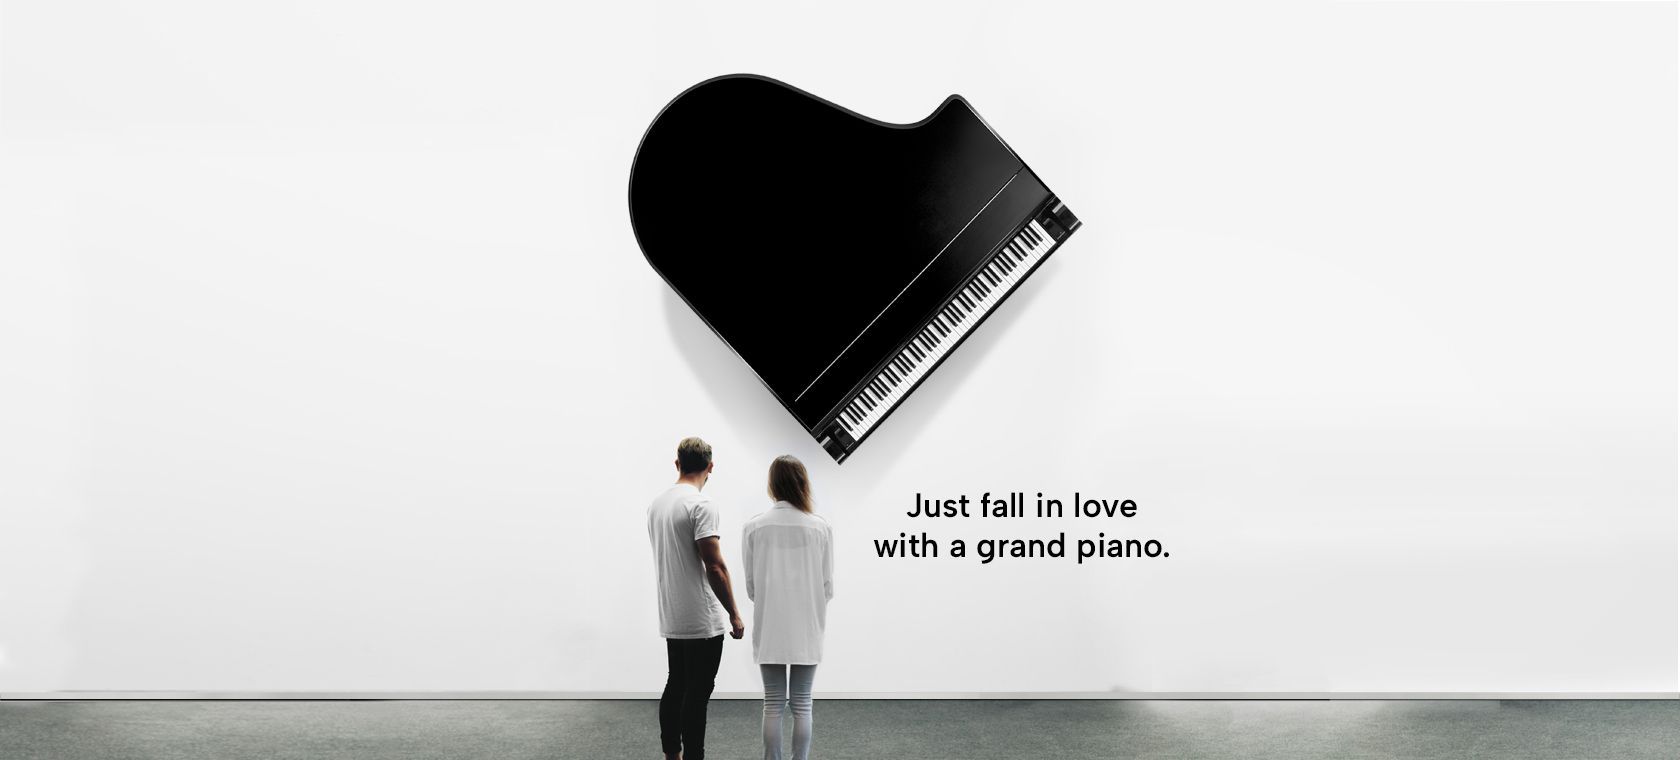 Just fall in love with a grand piano